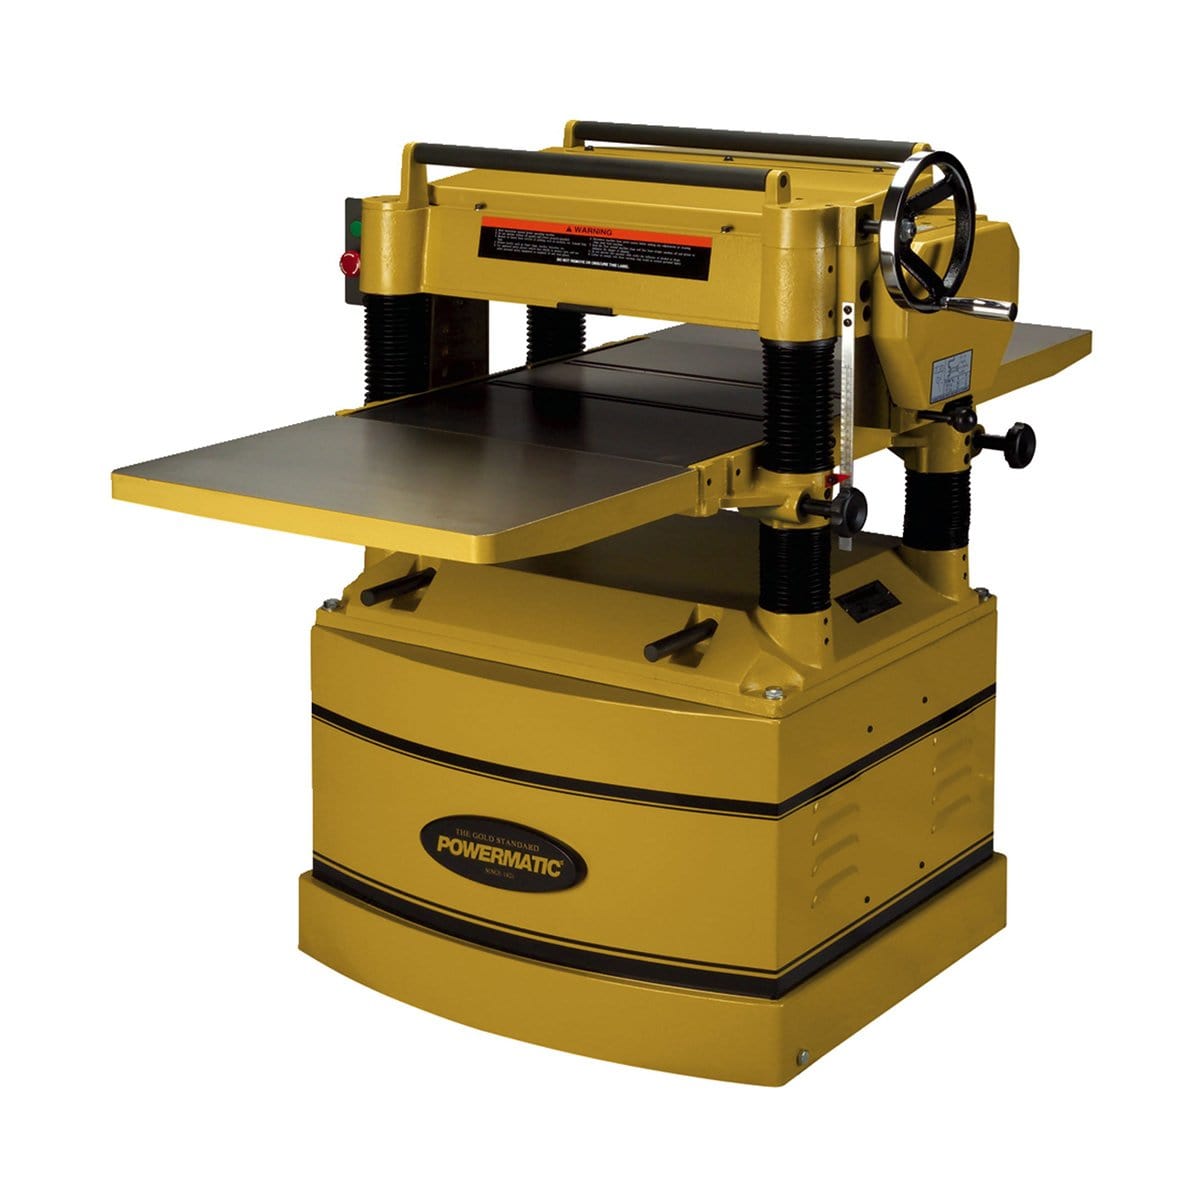 Powermatic 1791316 Planer 209HH-3 20" Planer with Helical Head 5HP 3-Phase